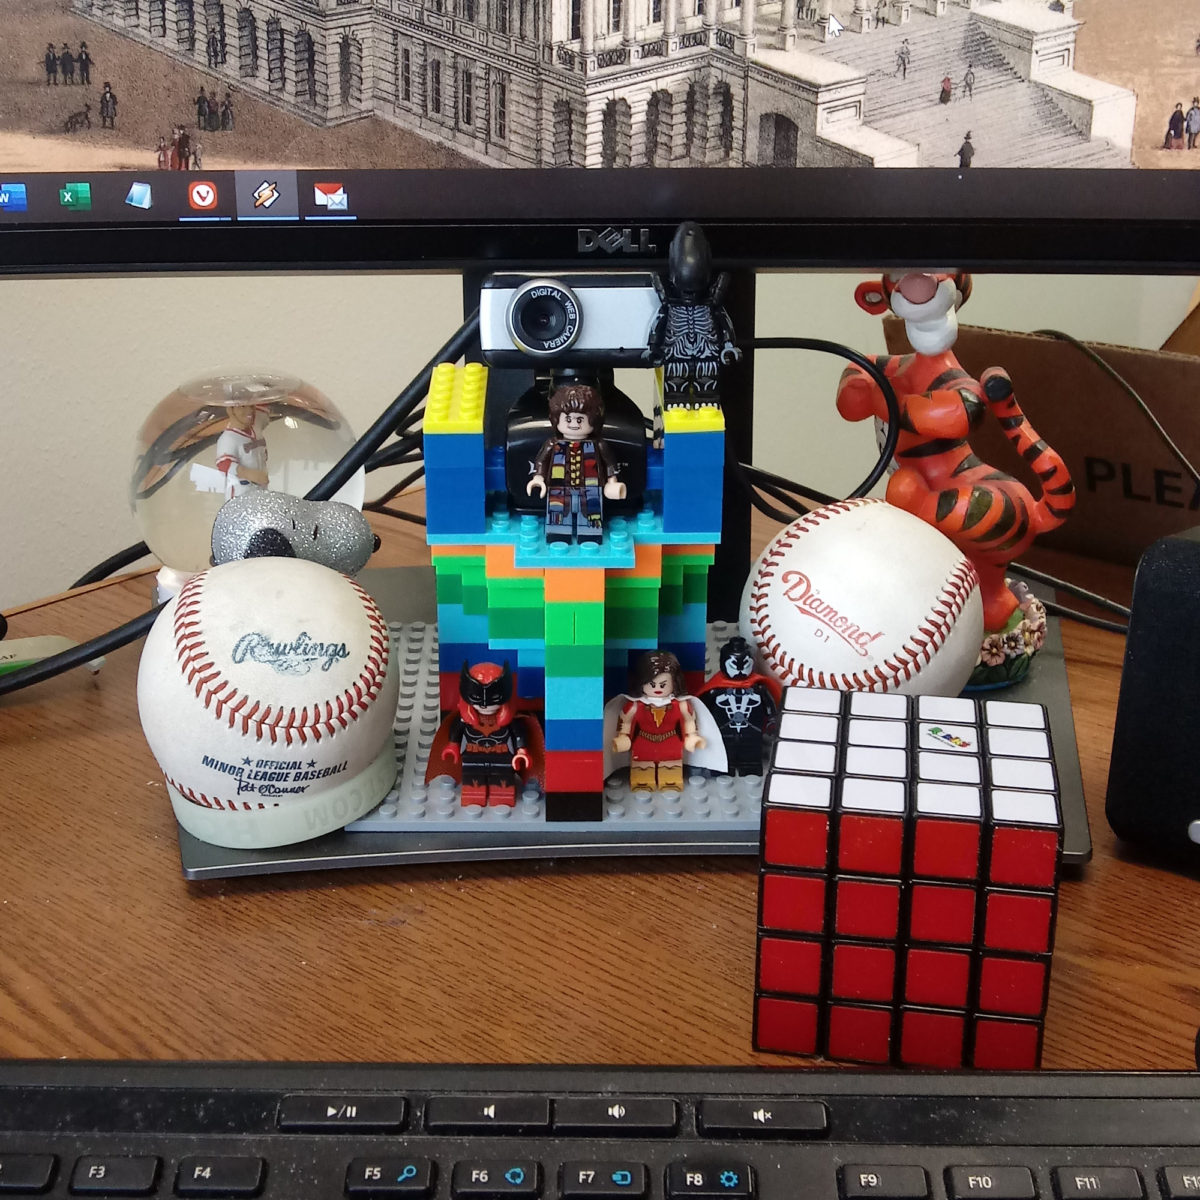 LEGO tower topped by a webcam